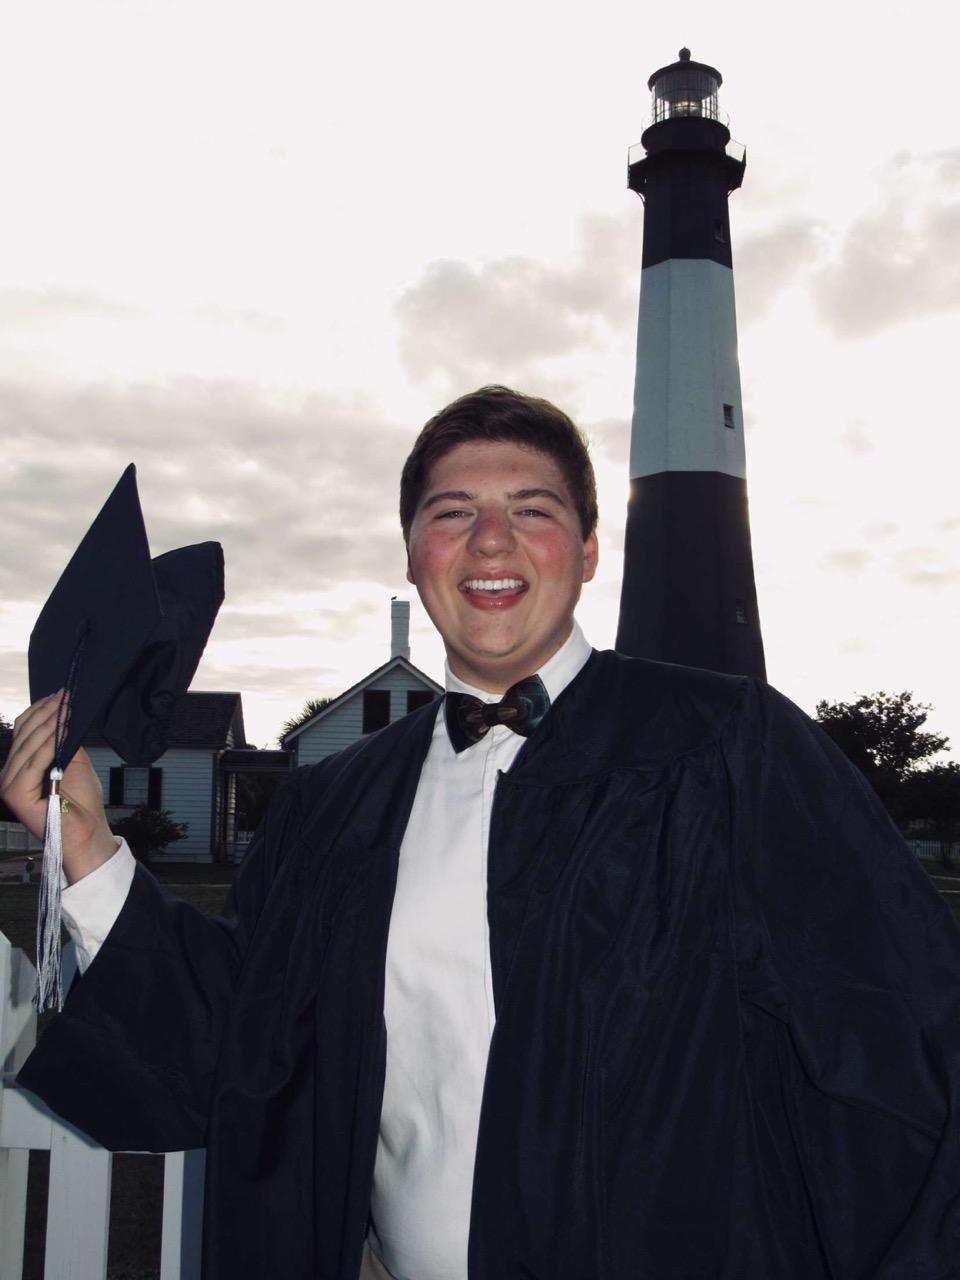 Carson Roberts dons his graduation robe for a celebratory photo in Effingham County.